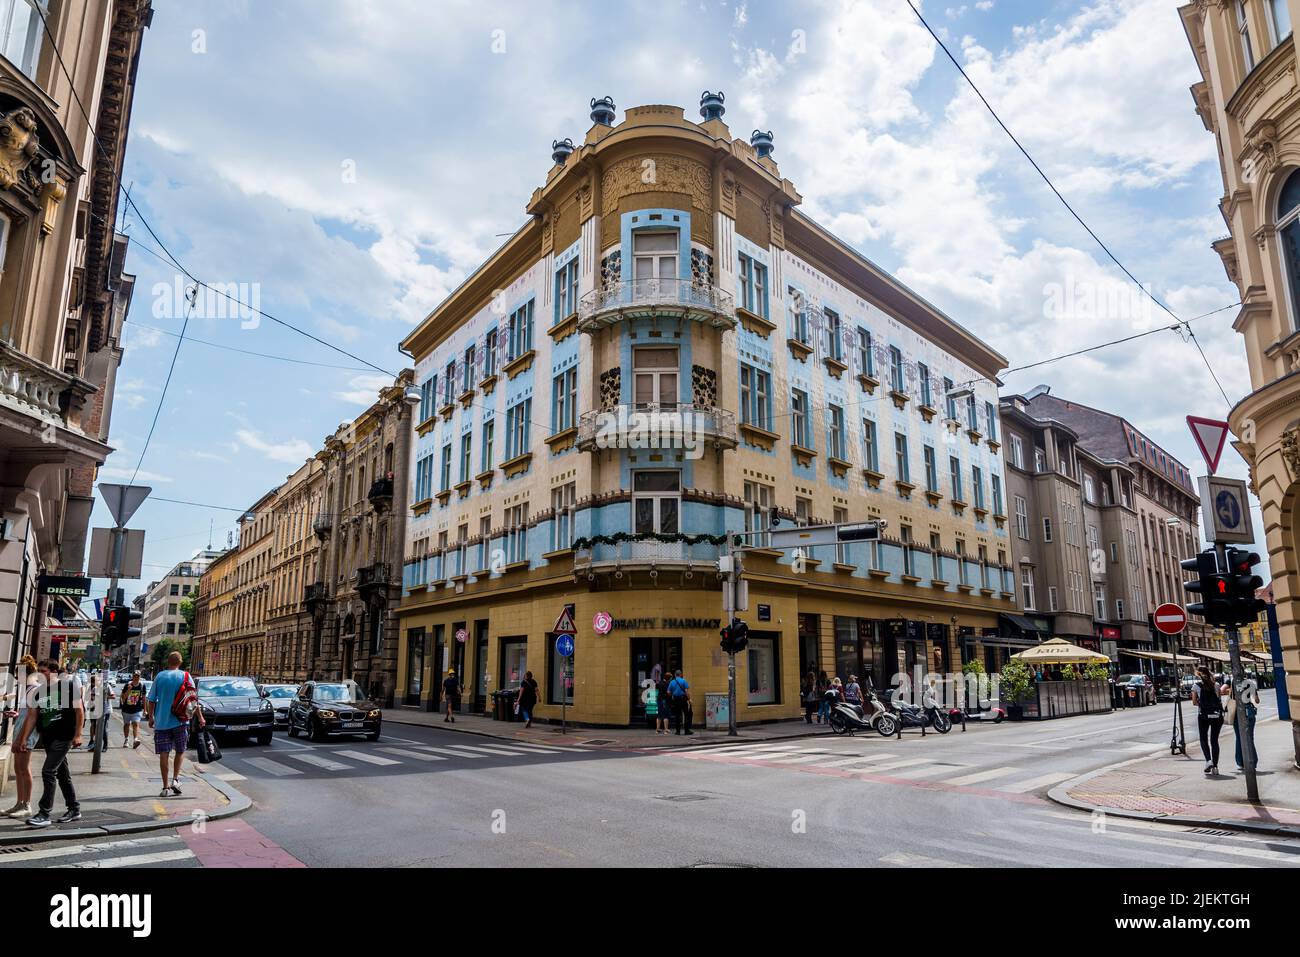 Kallina House, a historic residential building on the corner of Masarykova and Gundulićeva streets regarded as one of the finest examples of Secession Stock Photo